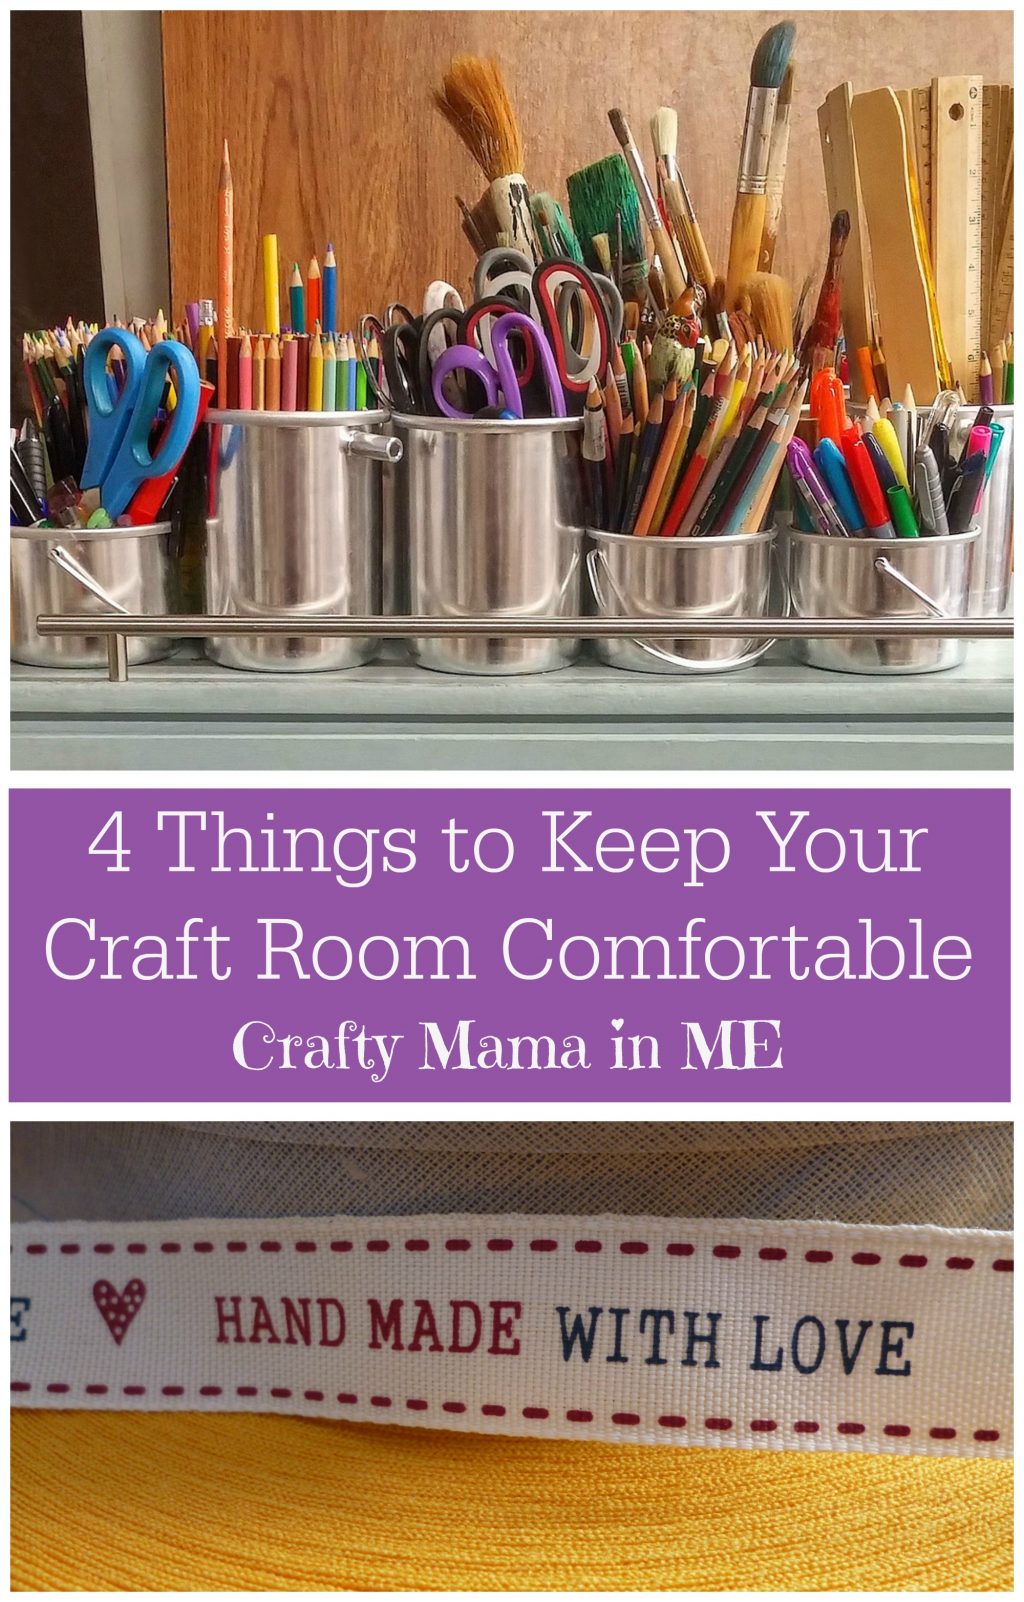 4 Things to Keep Your Craft Room Comfortable